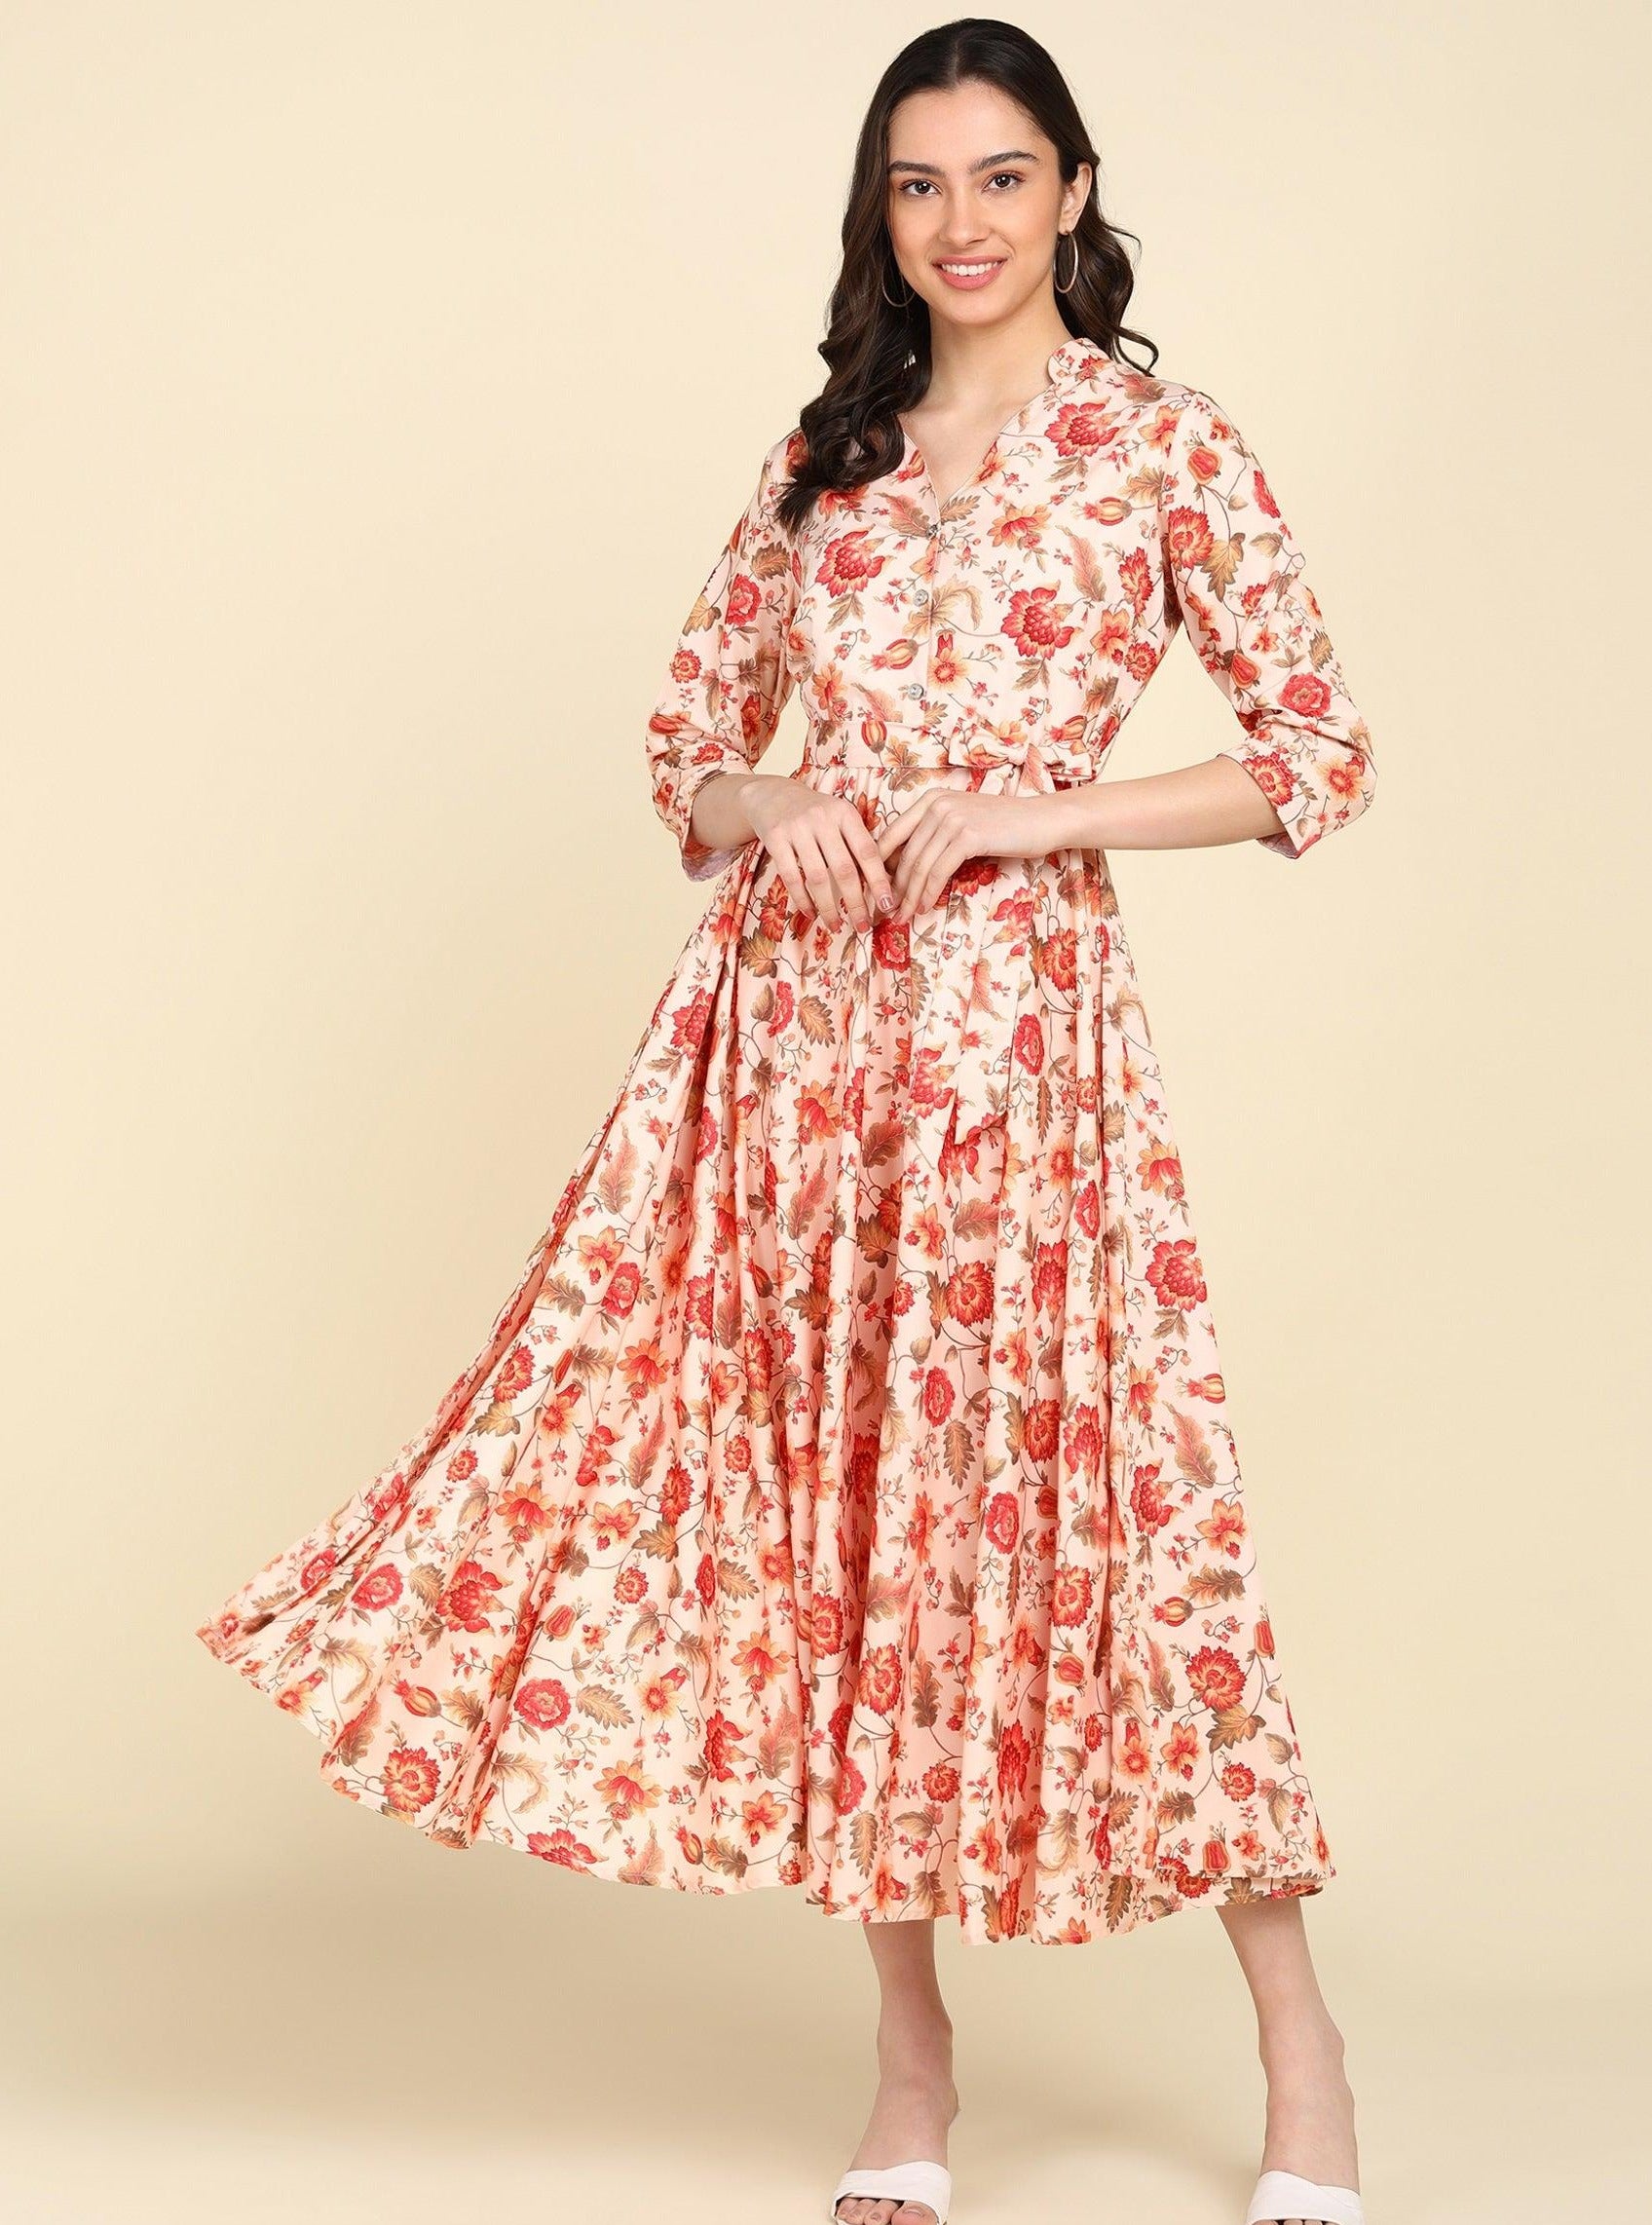 Red Floral Printed Beige Flared Dress - Znxclothing